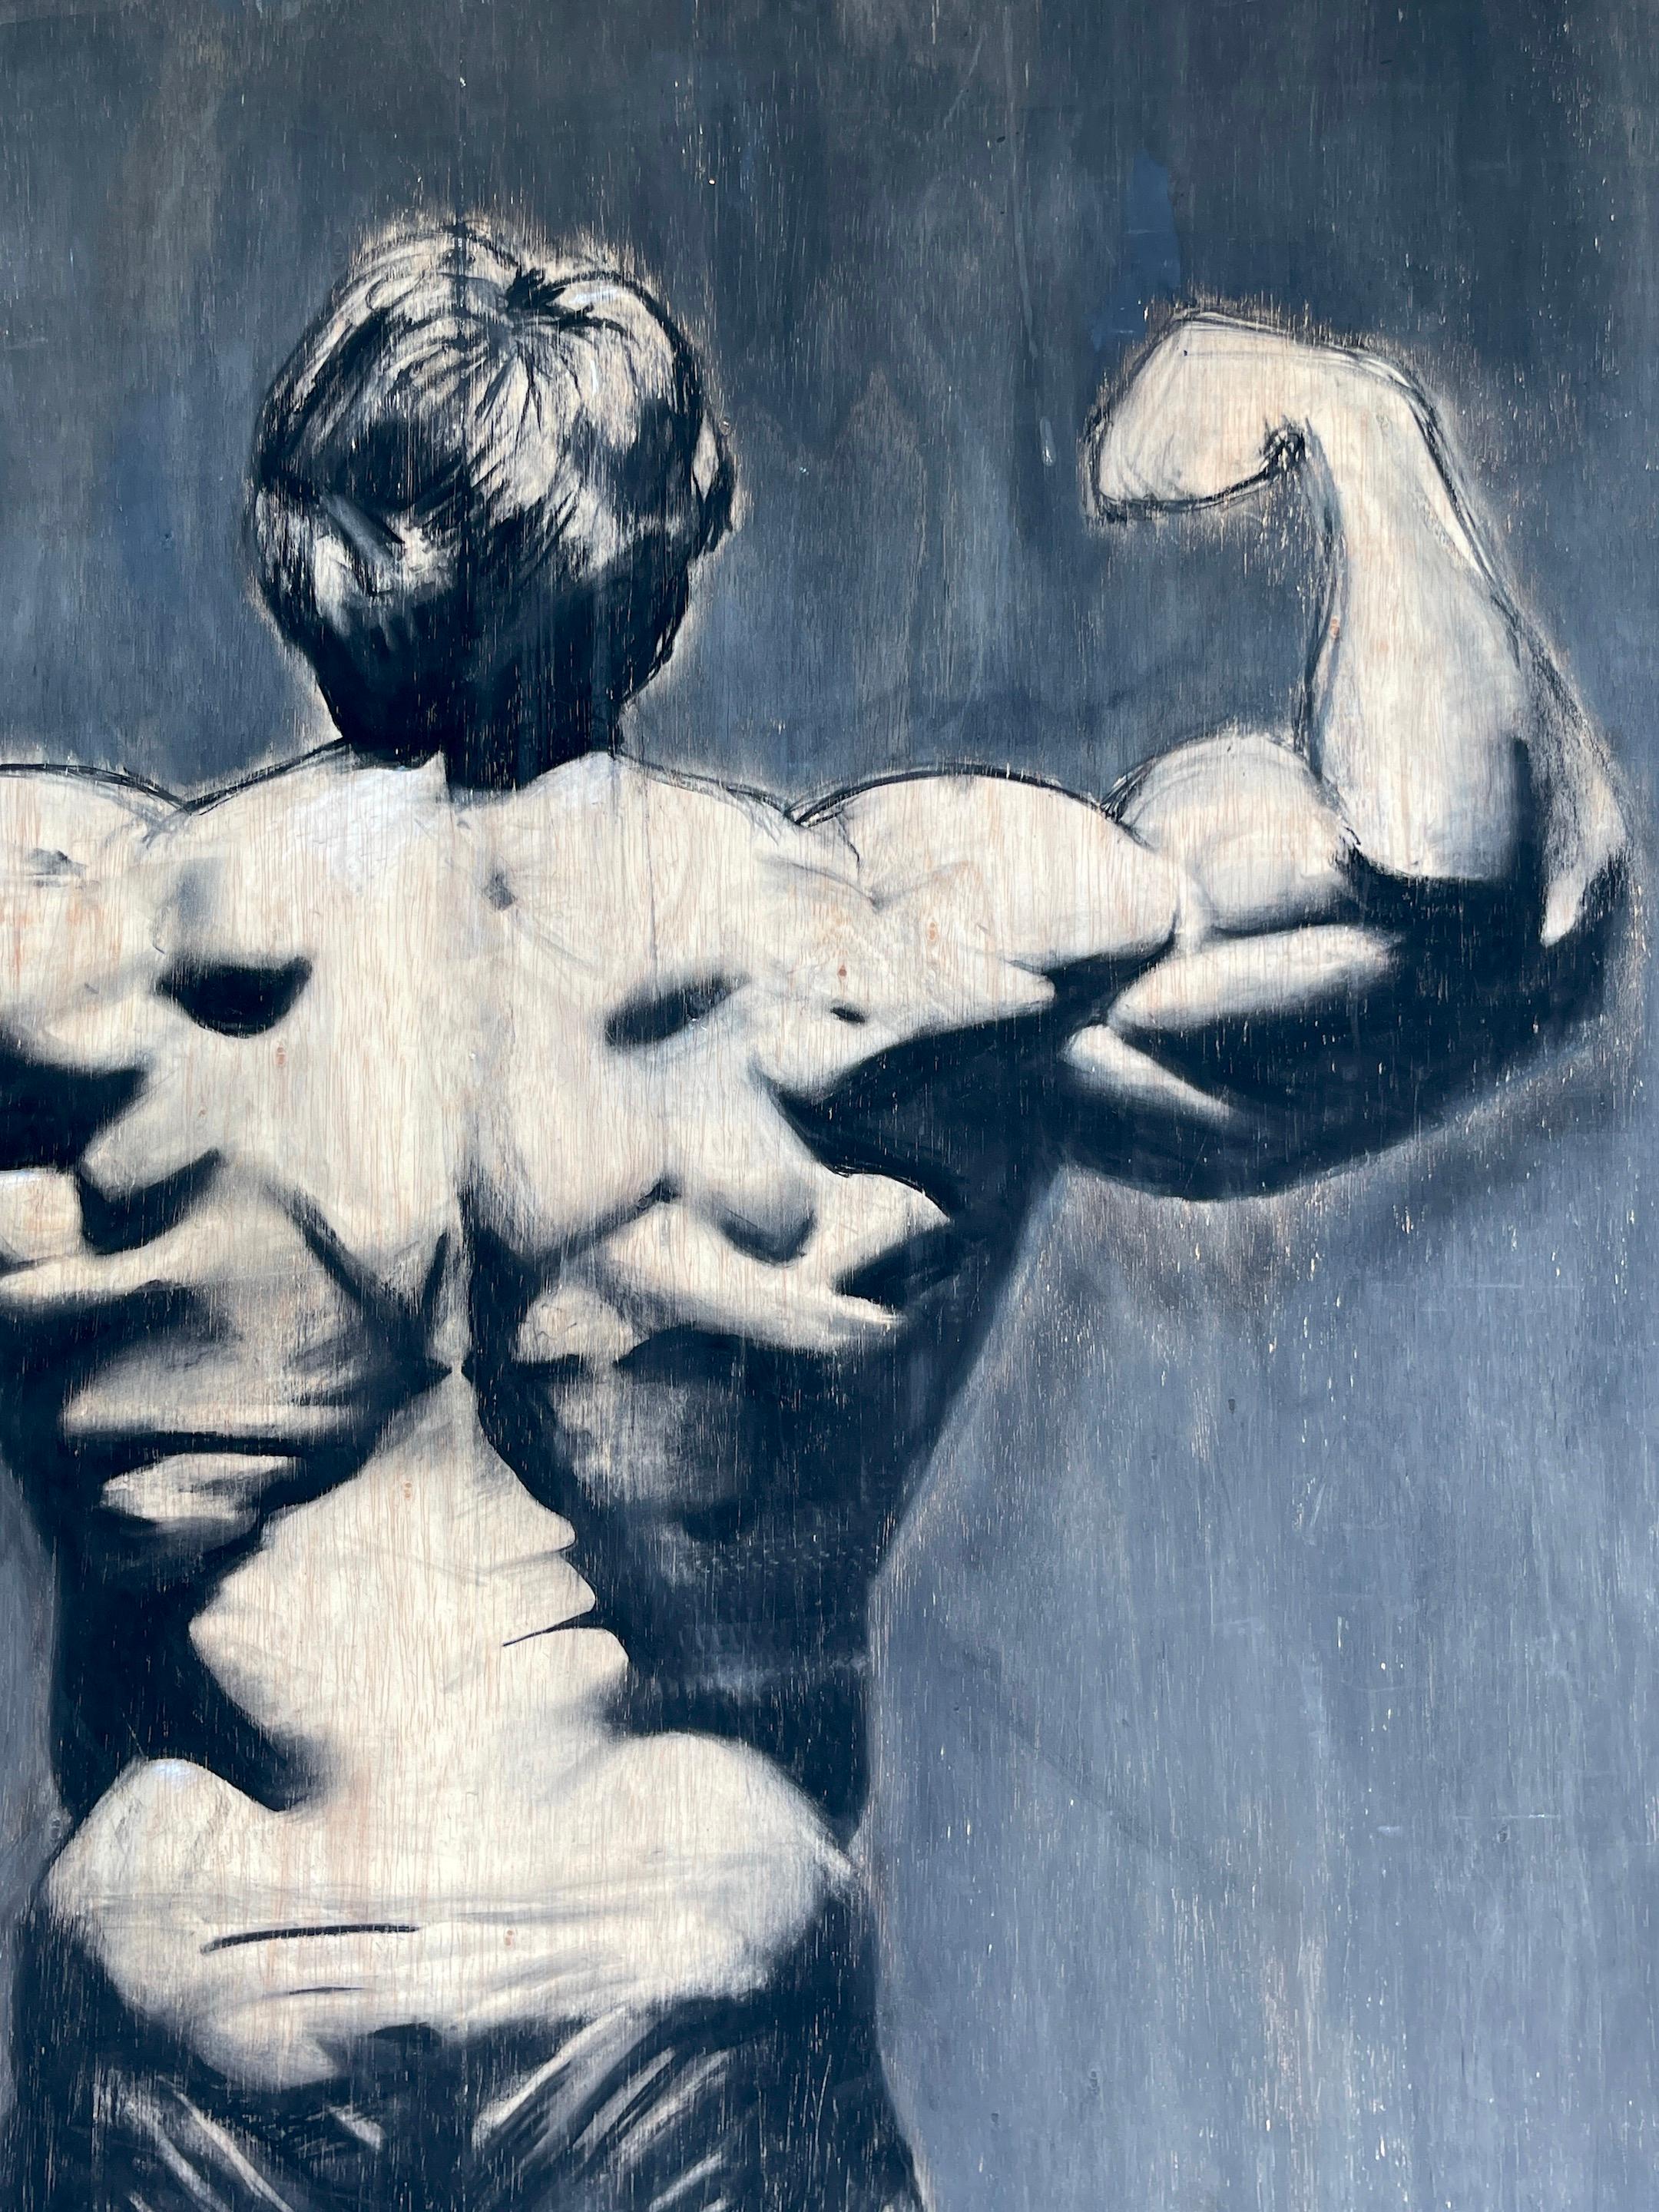 Hand-Painted Massive Black & White Painting of Arnold Schwarzenegger's 'Back Double Biceps' For Sale